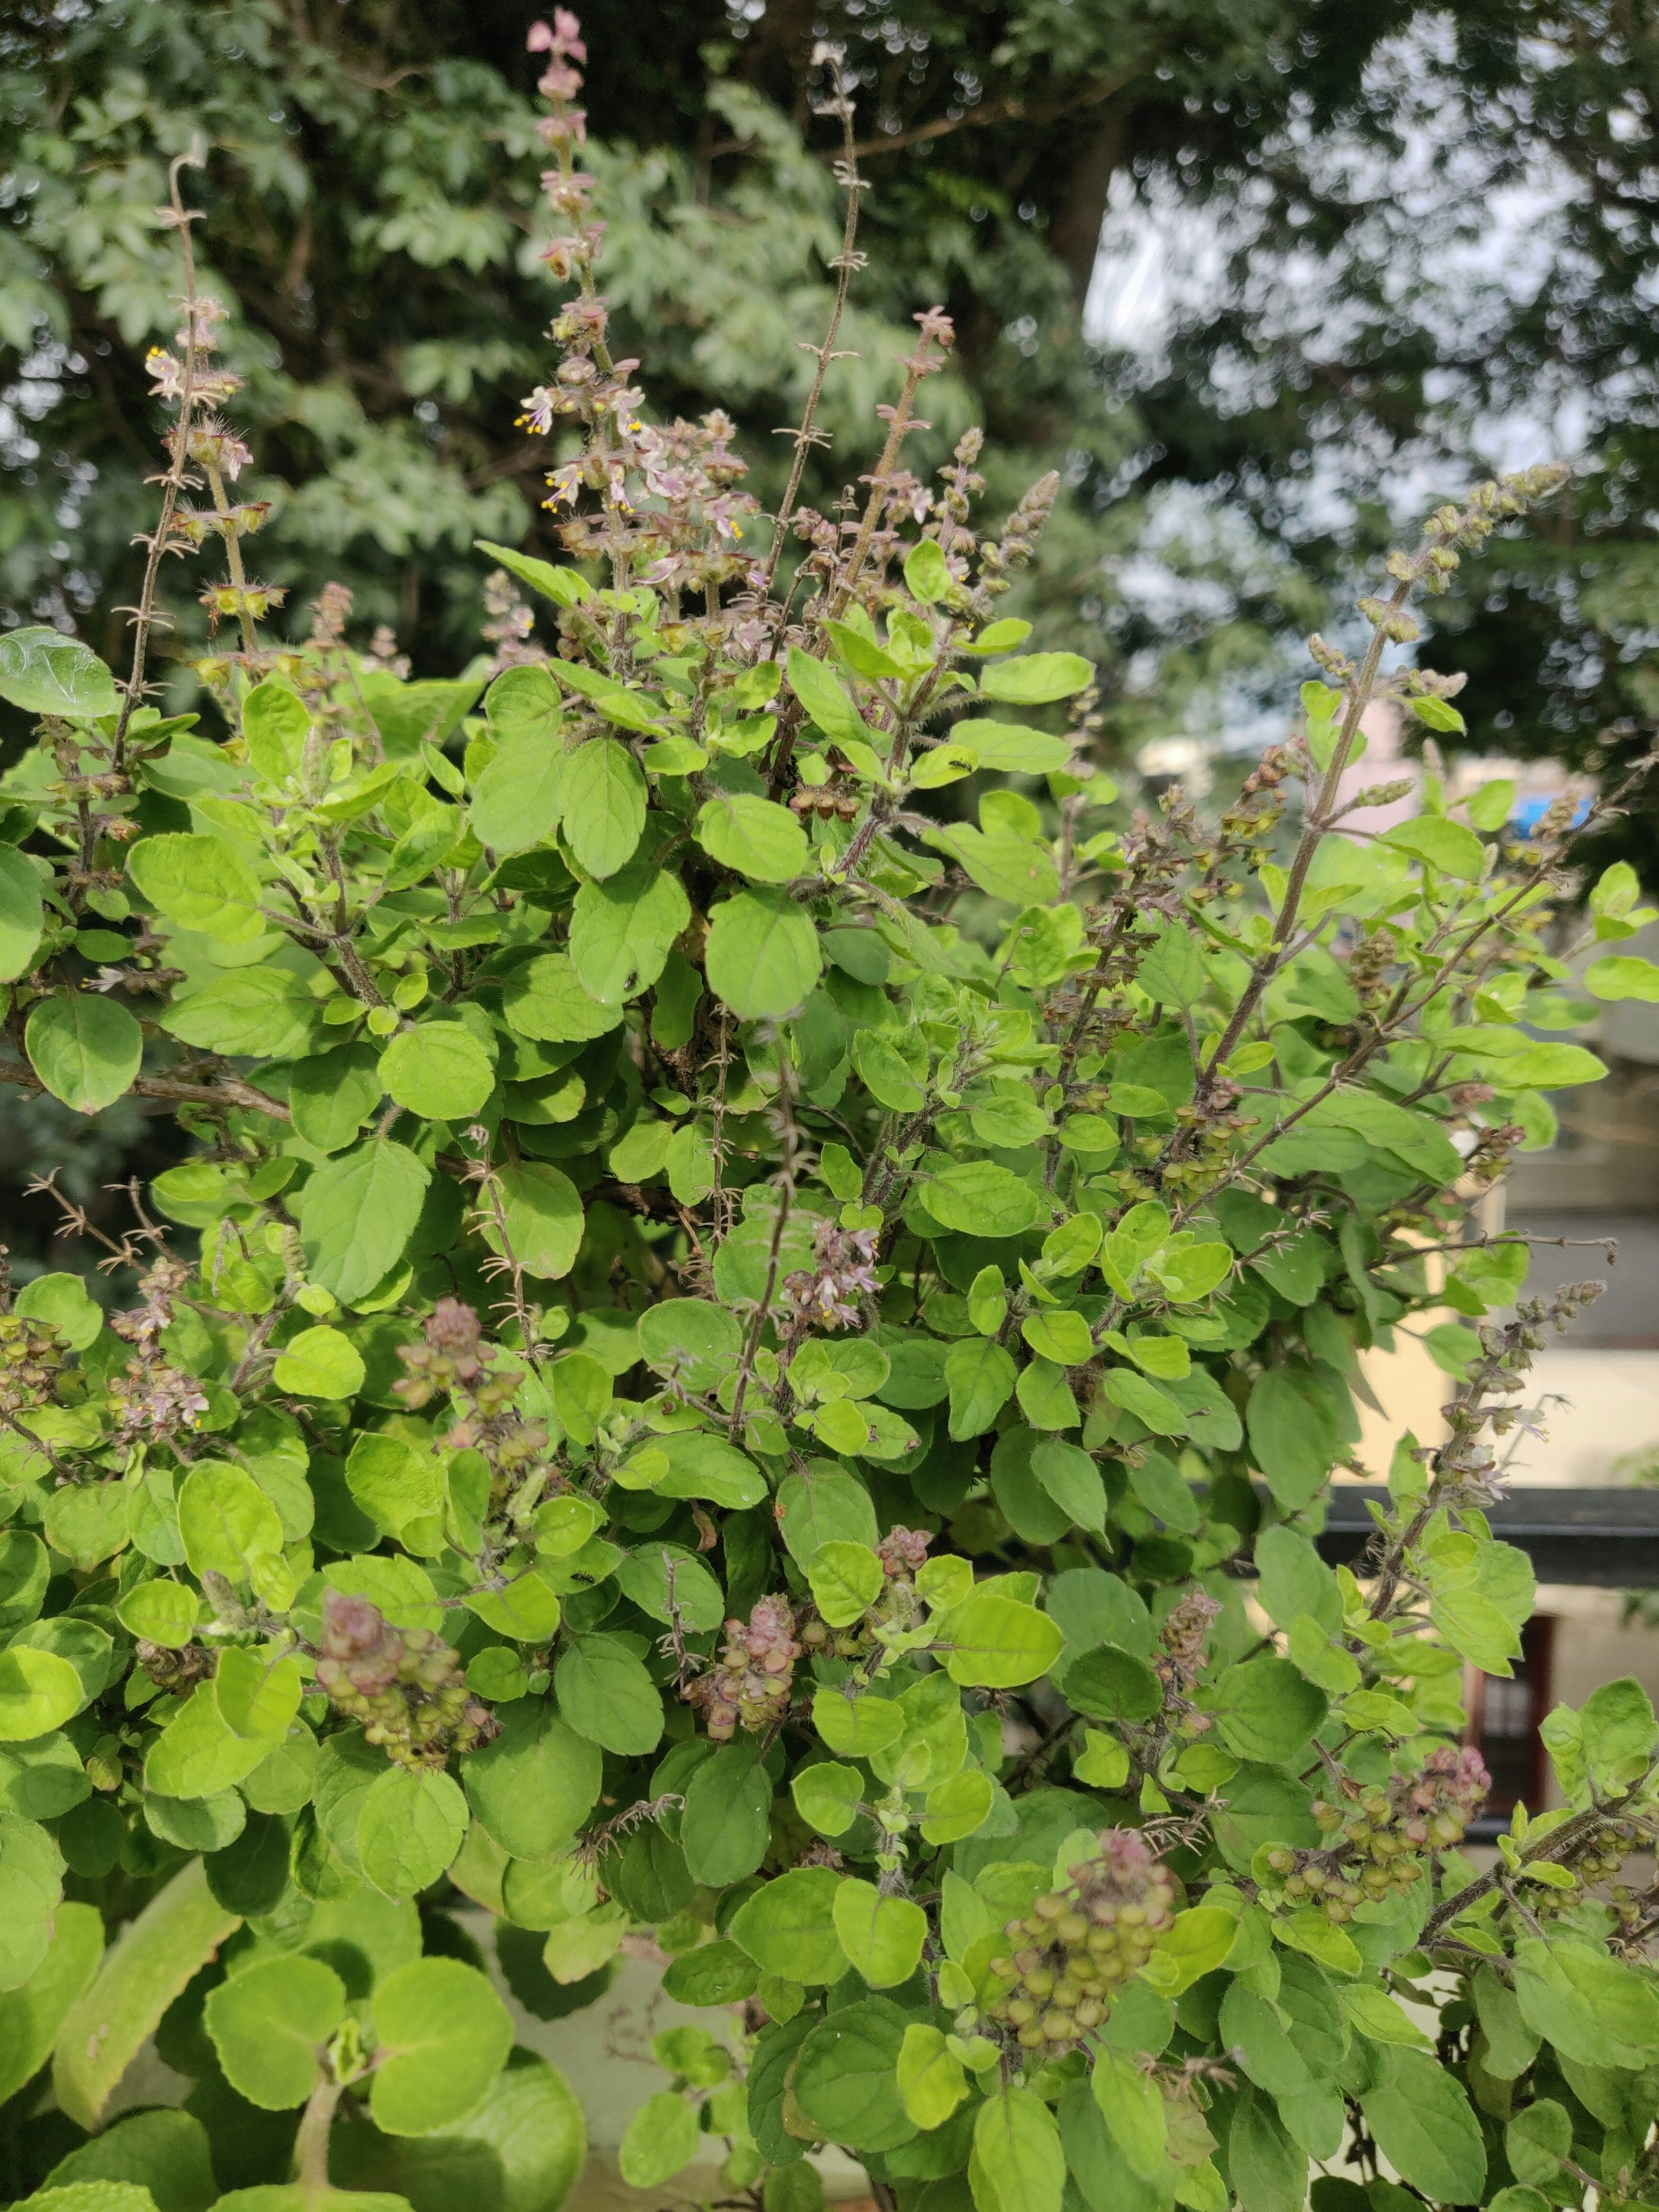 https://hindi.krishijagran.com/ampstories/eating-tulsi-leaves-daily-empty-stomach-is-beneficial-in-many-health-problems.html